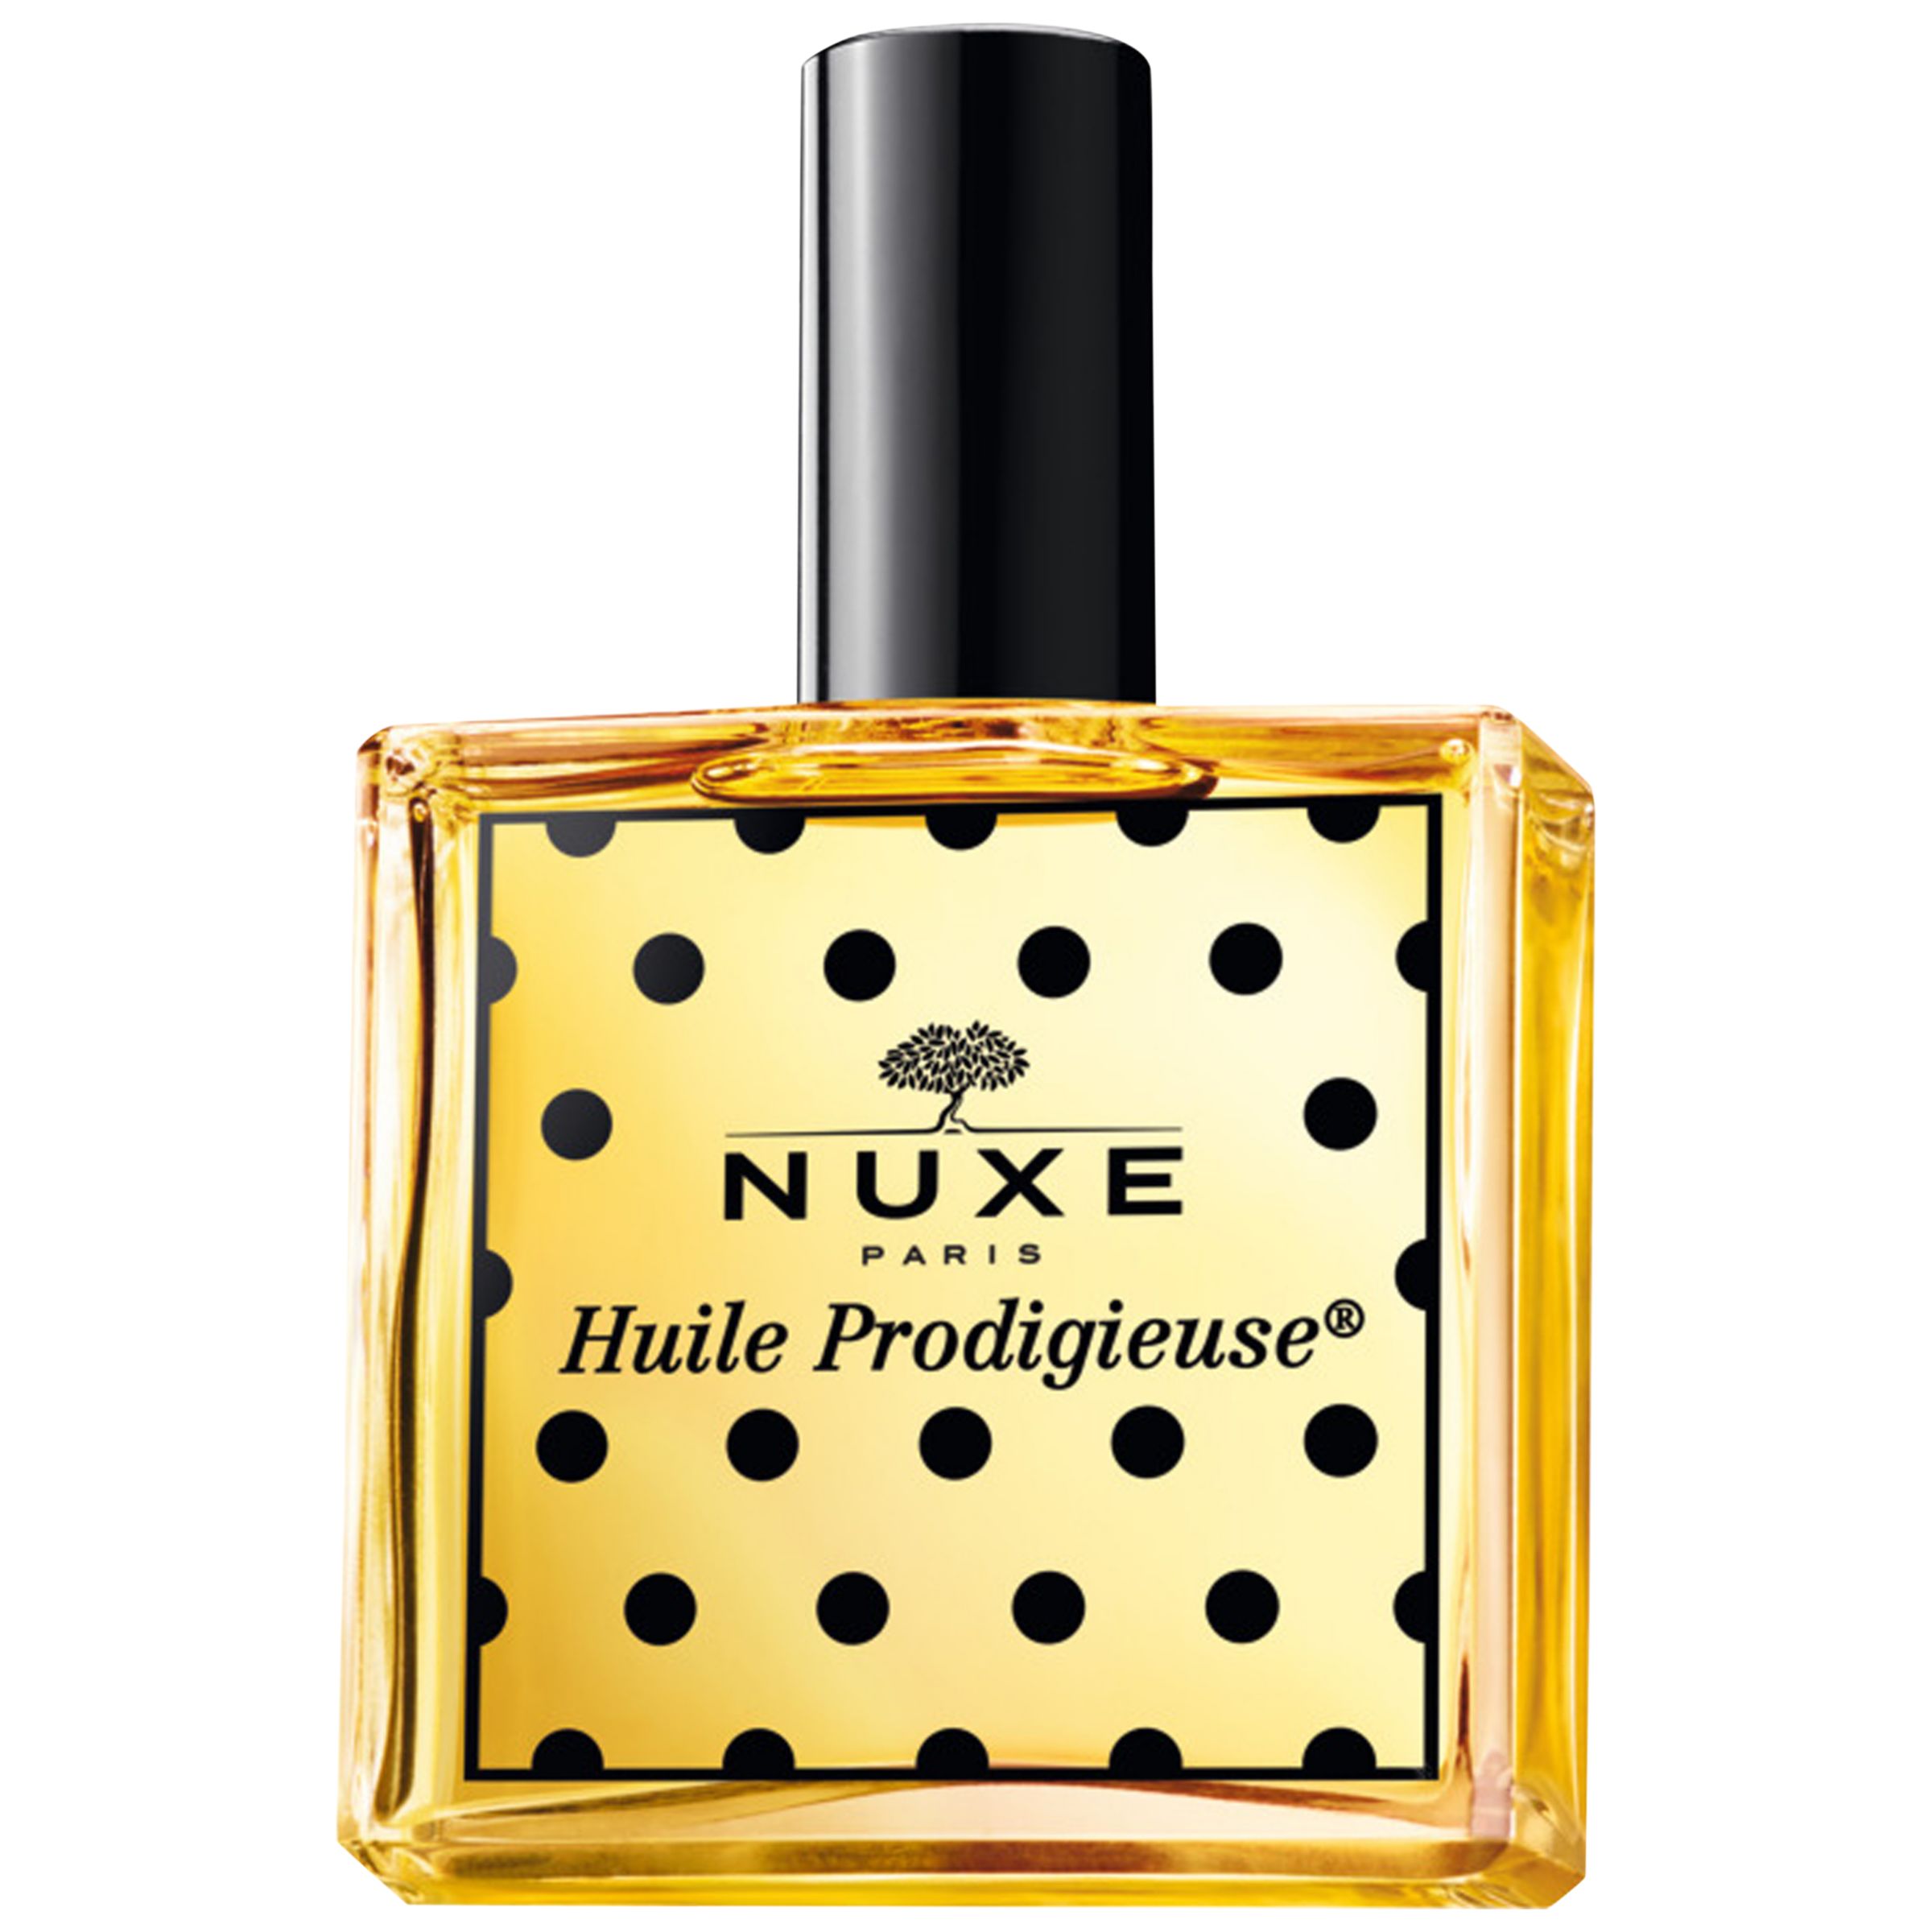 NUXE Dry Oil Huile Prodigieuse® Limited Edition Plumetis, 100ml